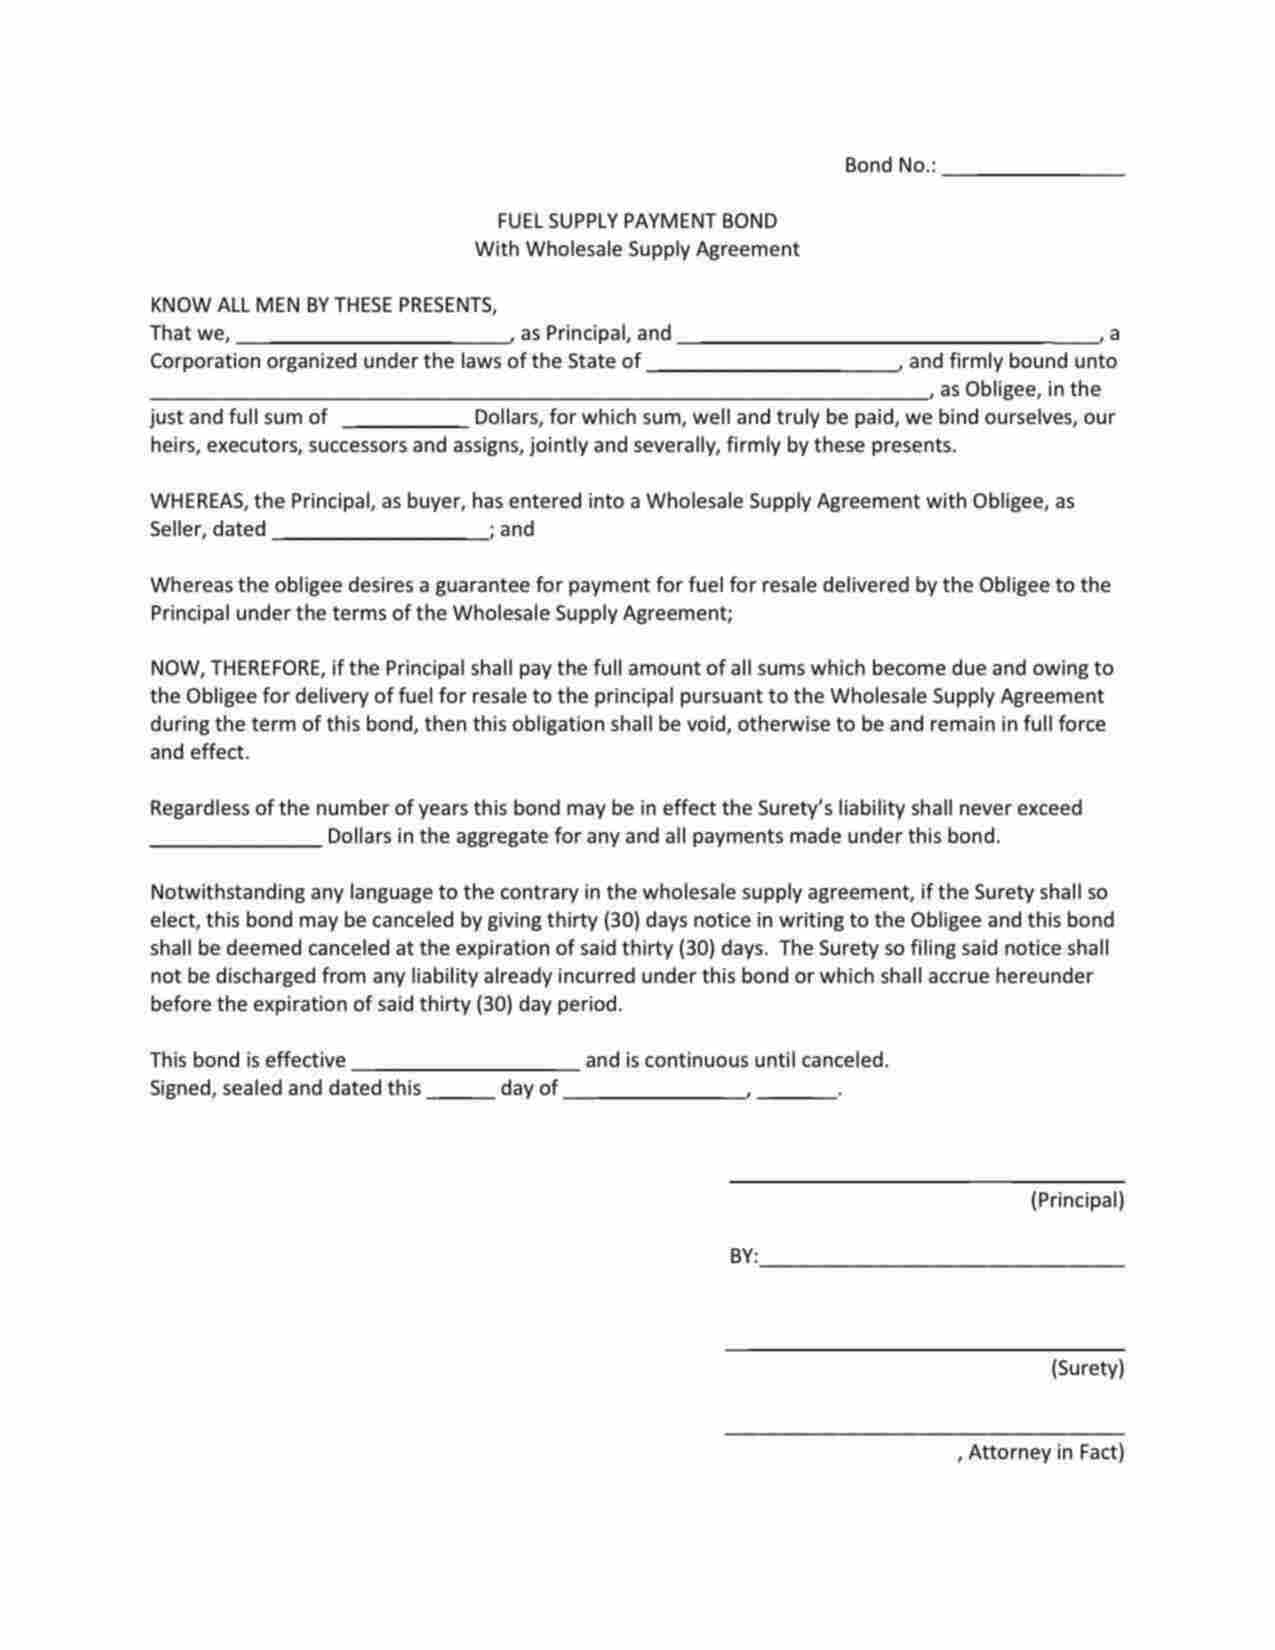 Maryland Fuel Supply Payment Bond Form